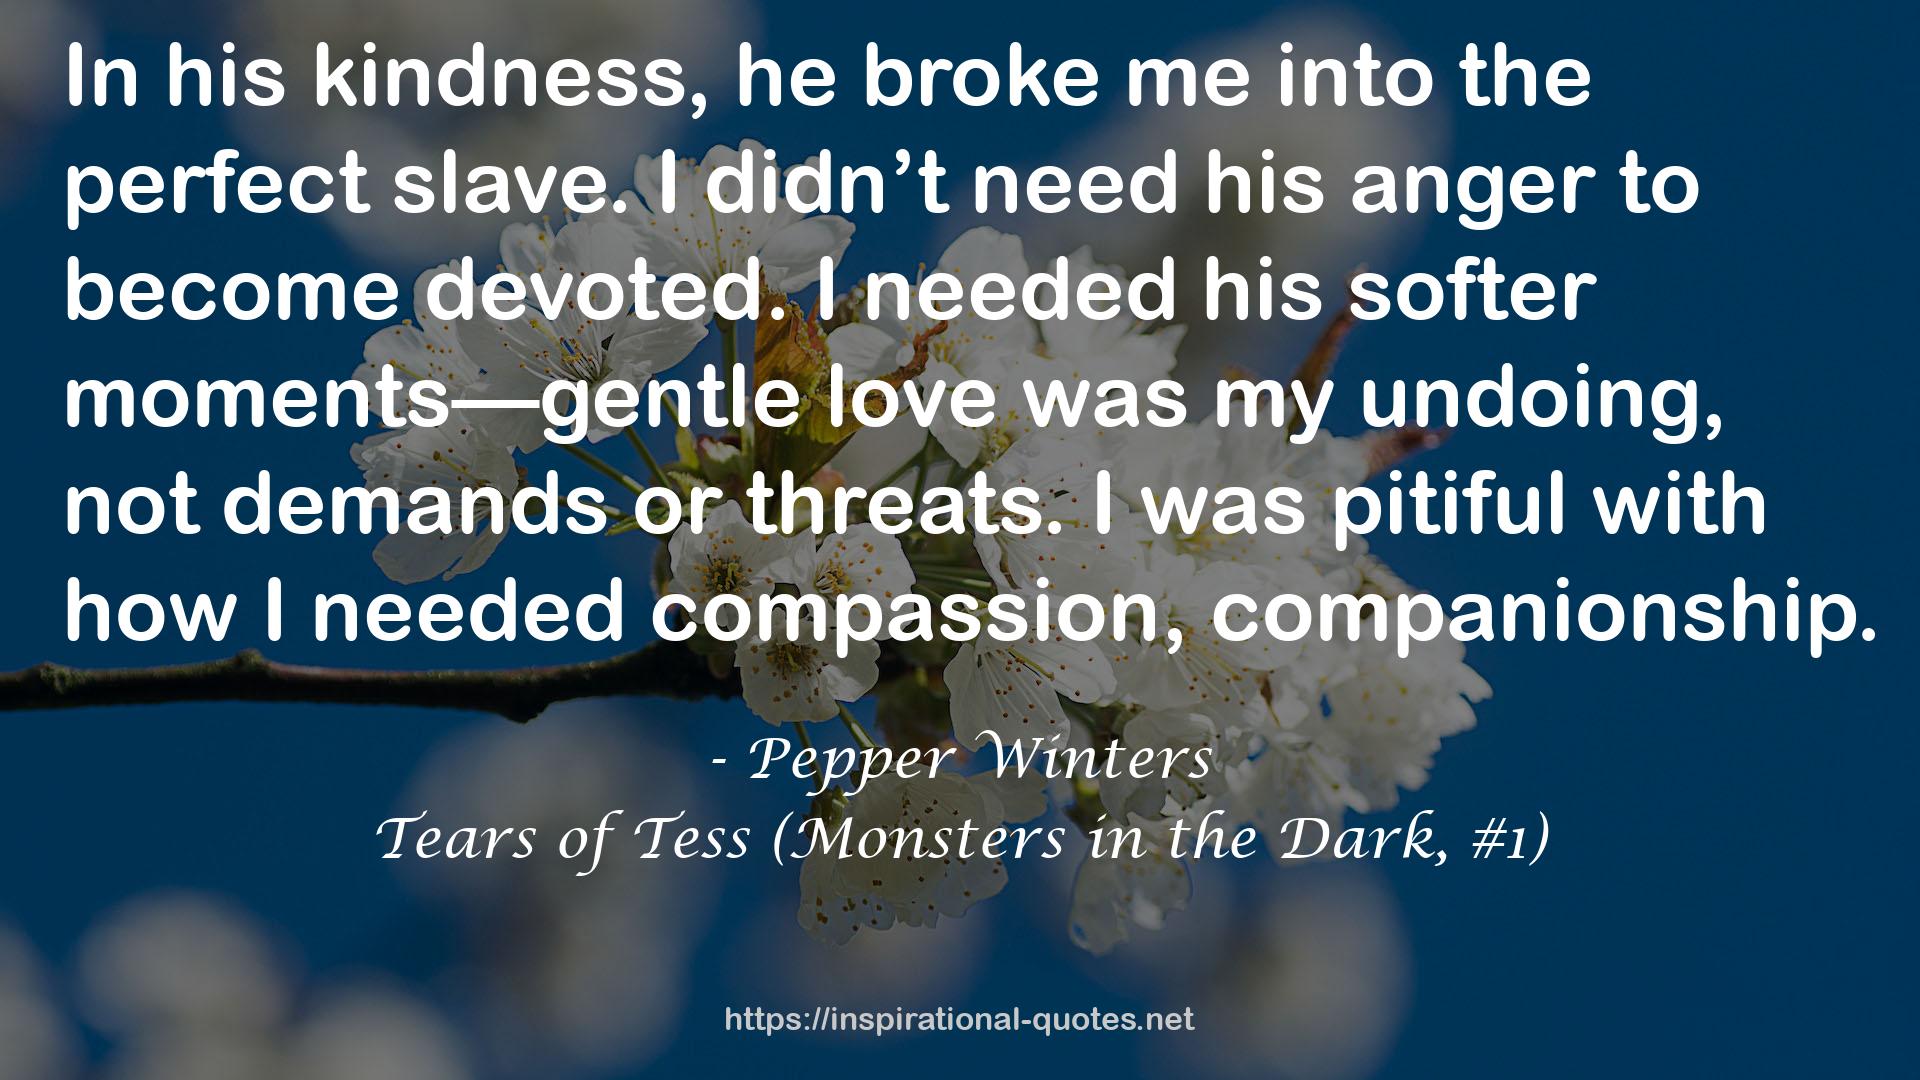 Tears of Tess (Monsters in the Dark, #1) QUOTES